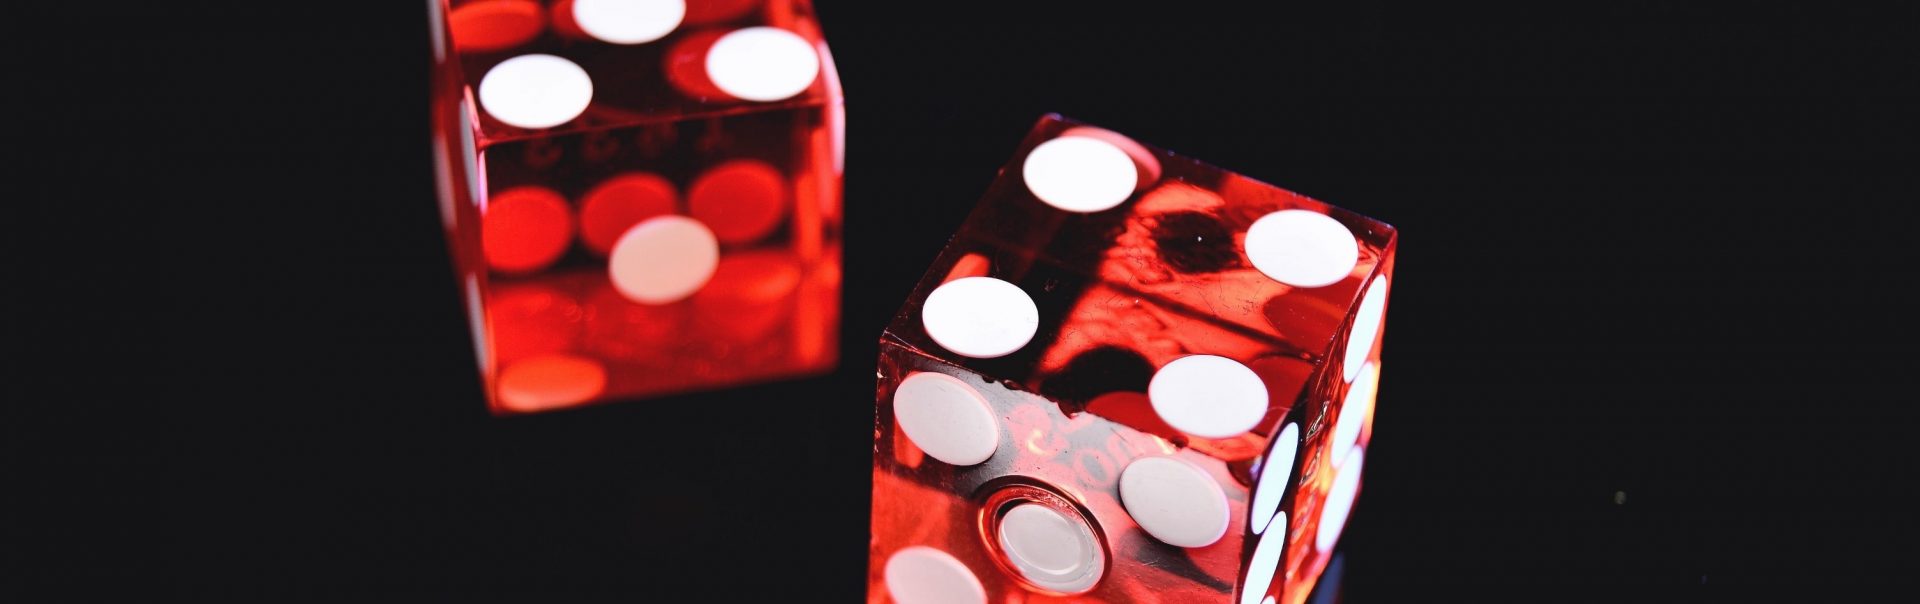 Two red dice sit on a black table.